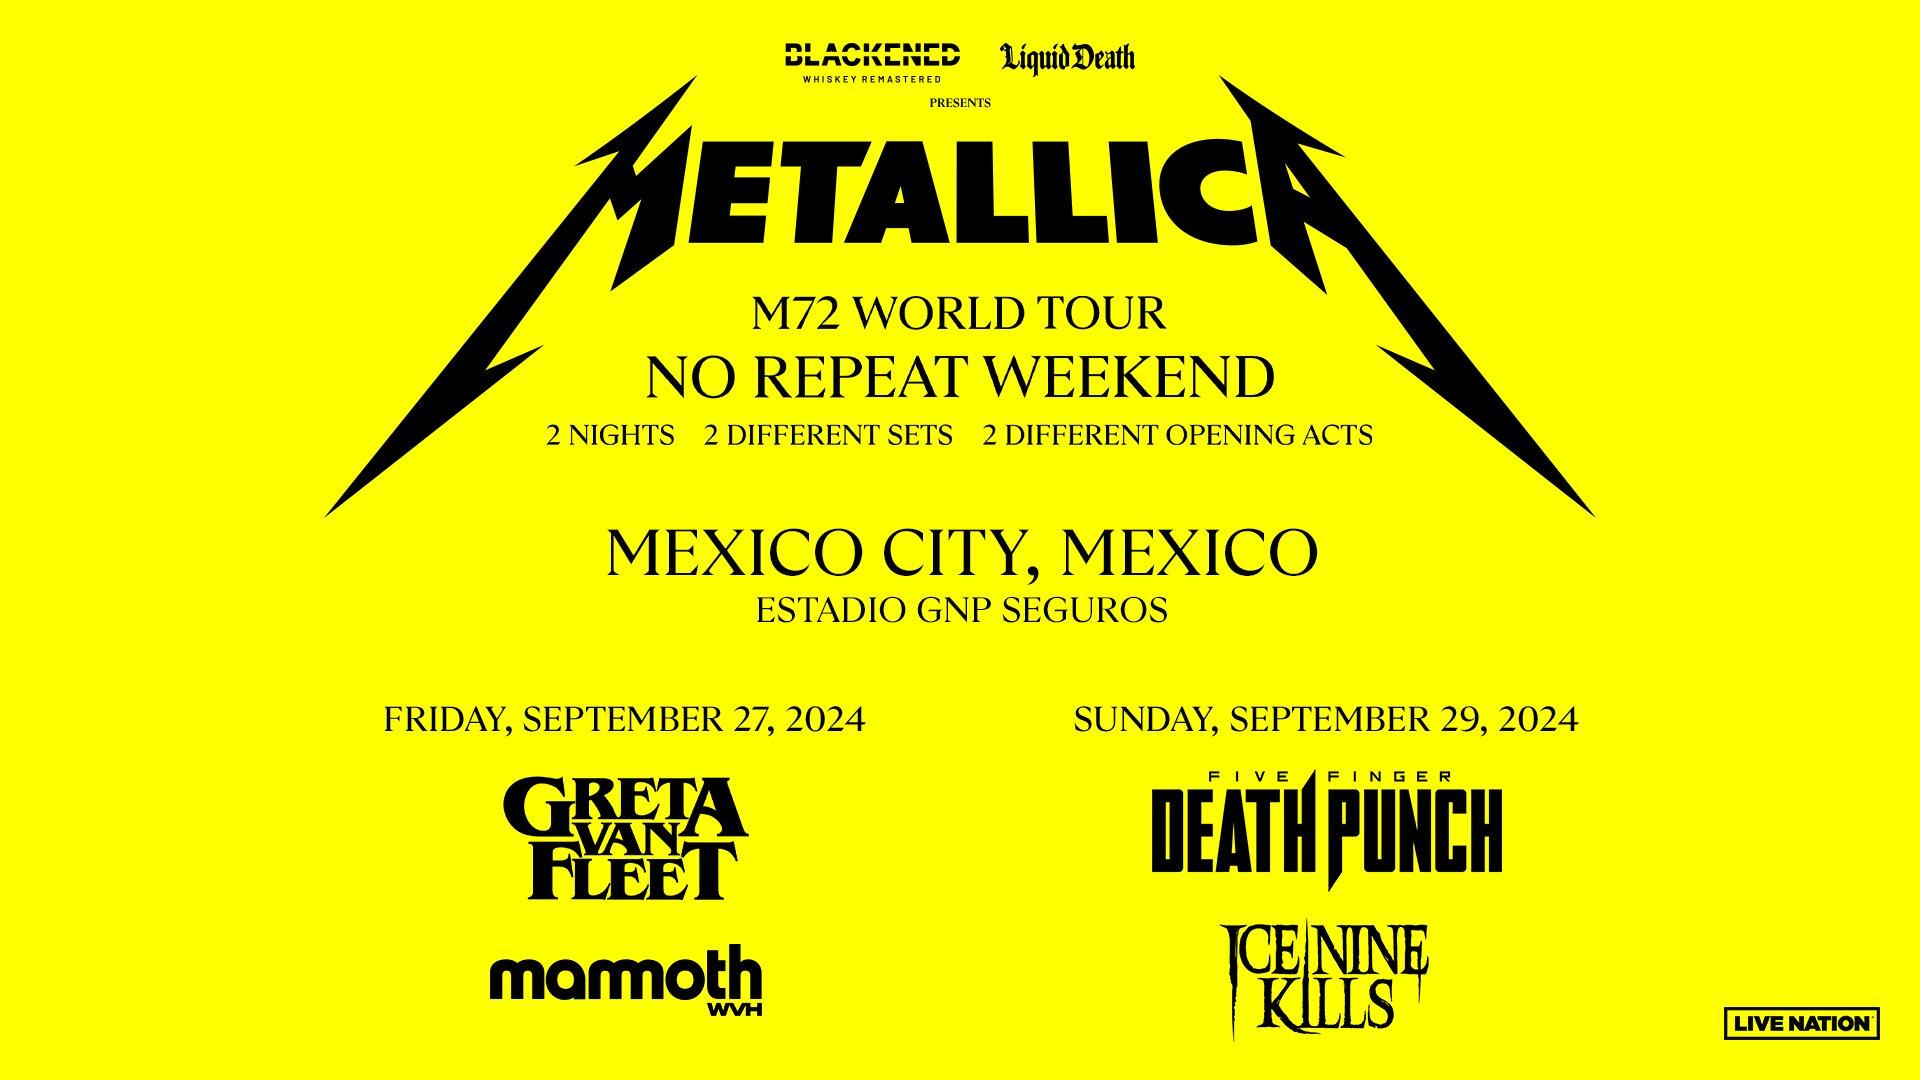 Metallica at Foro Sol in Mexico City, Mexico on September 27, 2024 on the M72 World Tour